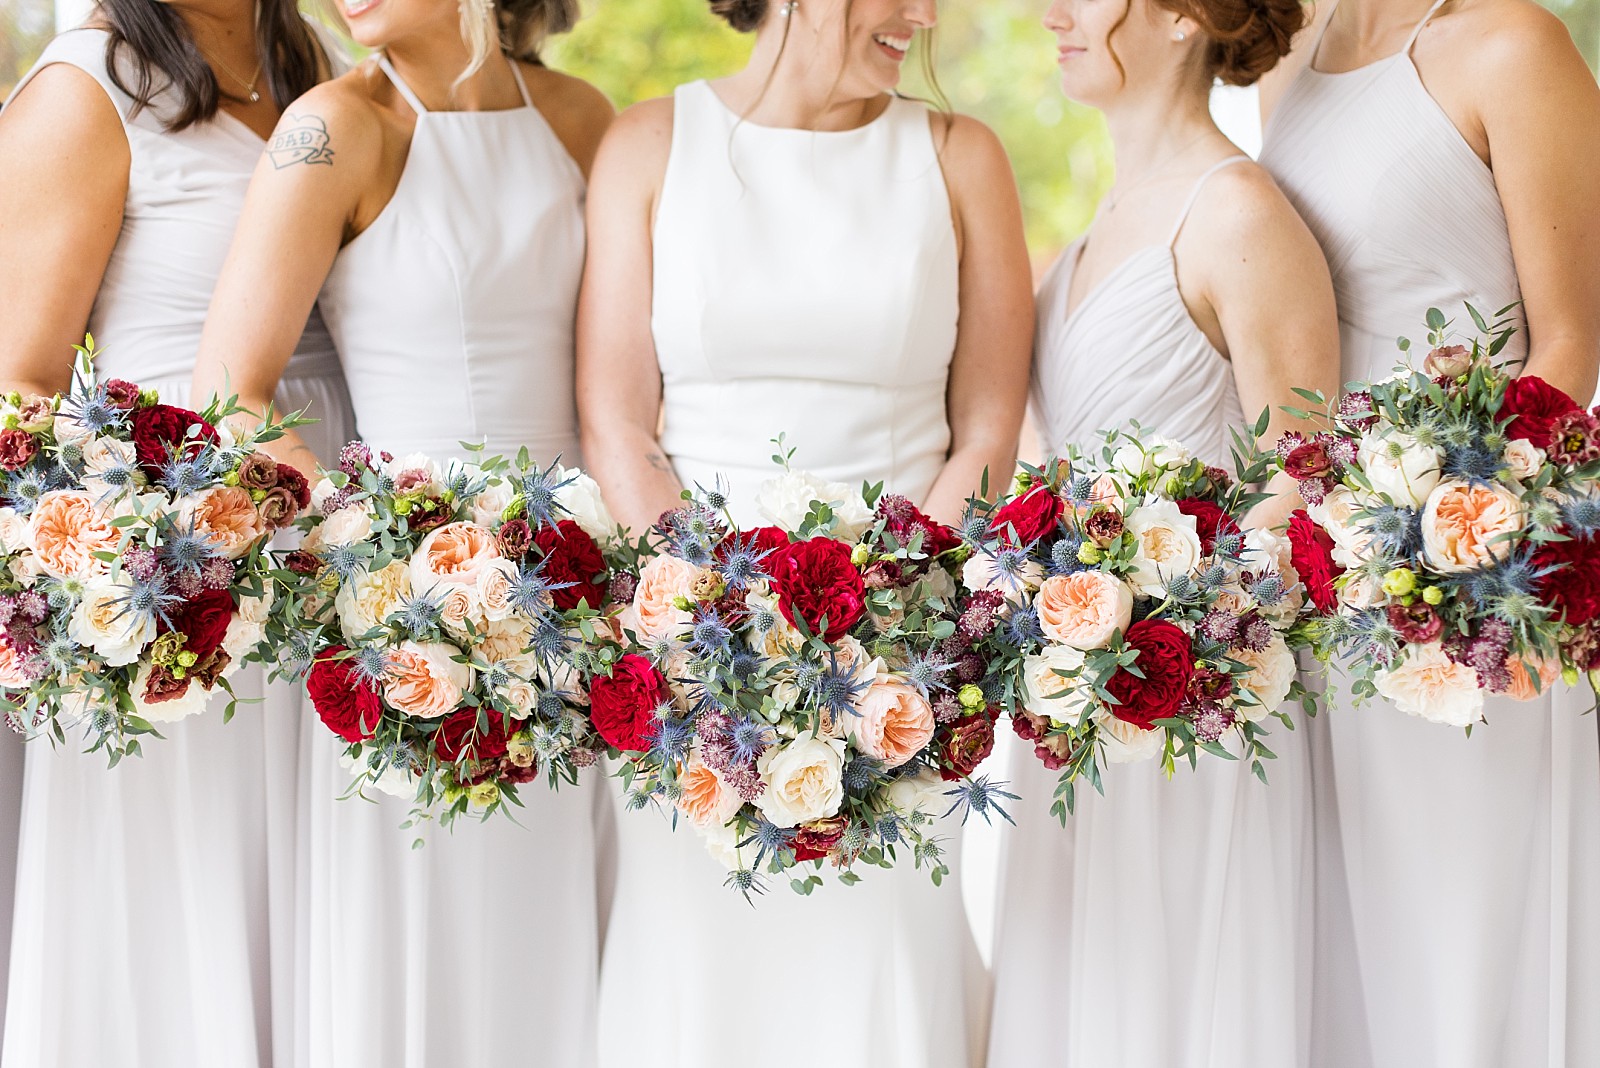 Bridal party bouquets for fall wedding at The Upchurch in Cary NC | Raleigh NC Wedding Photography